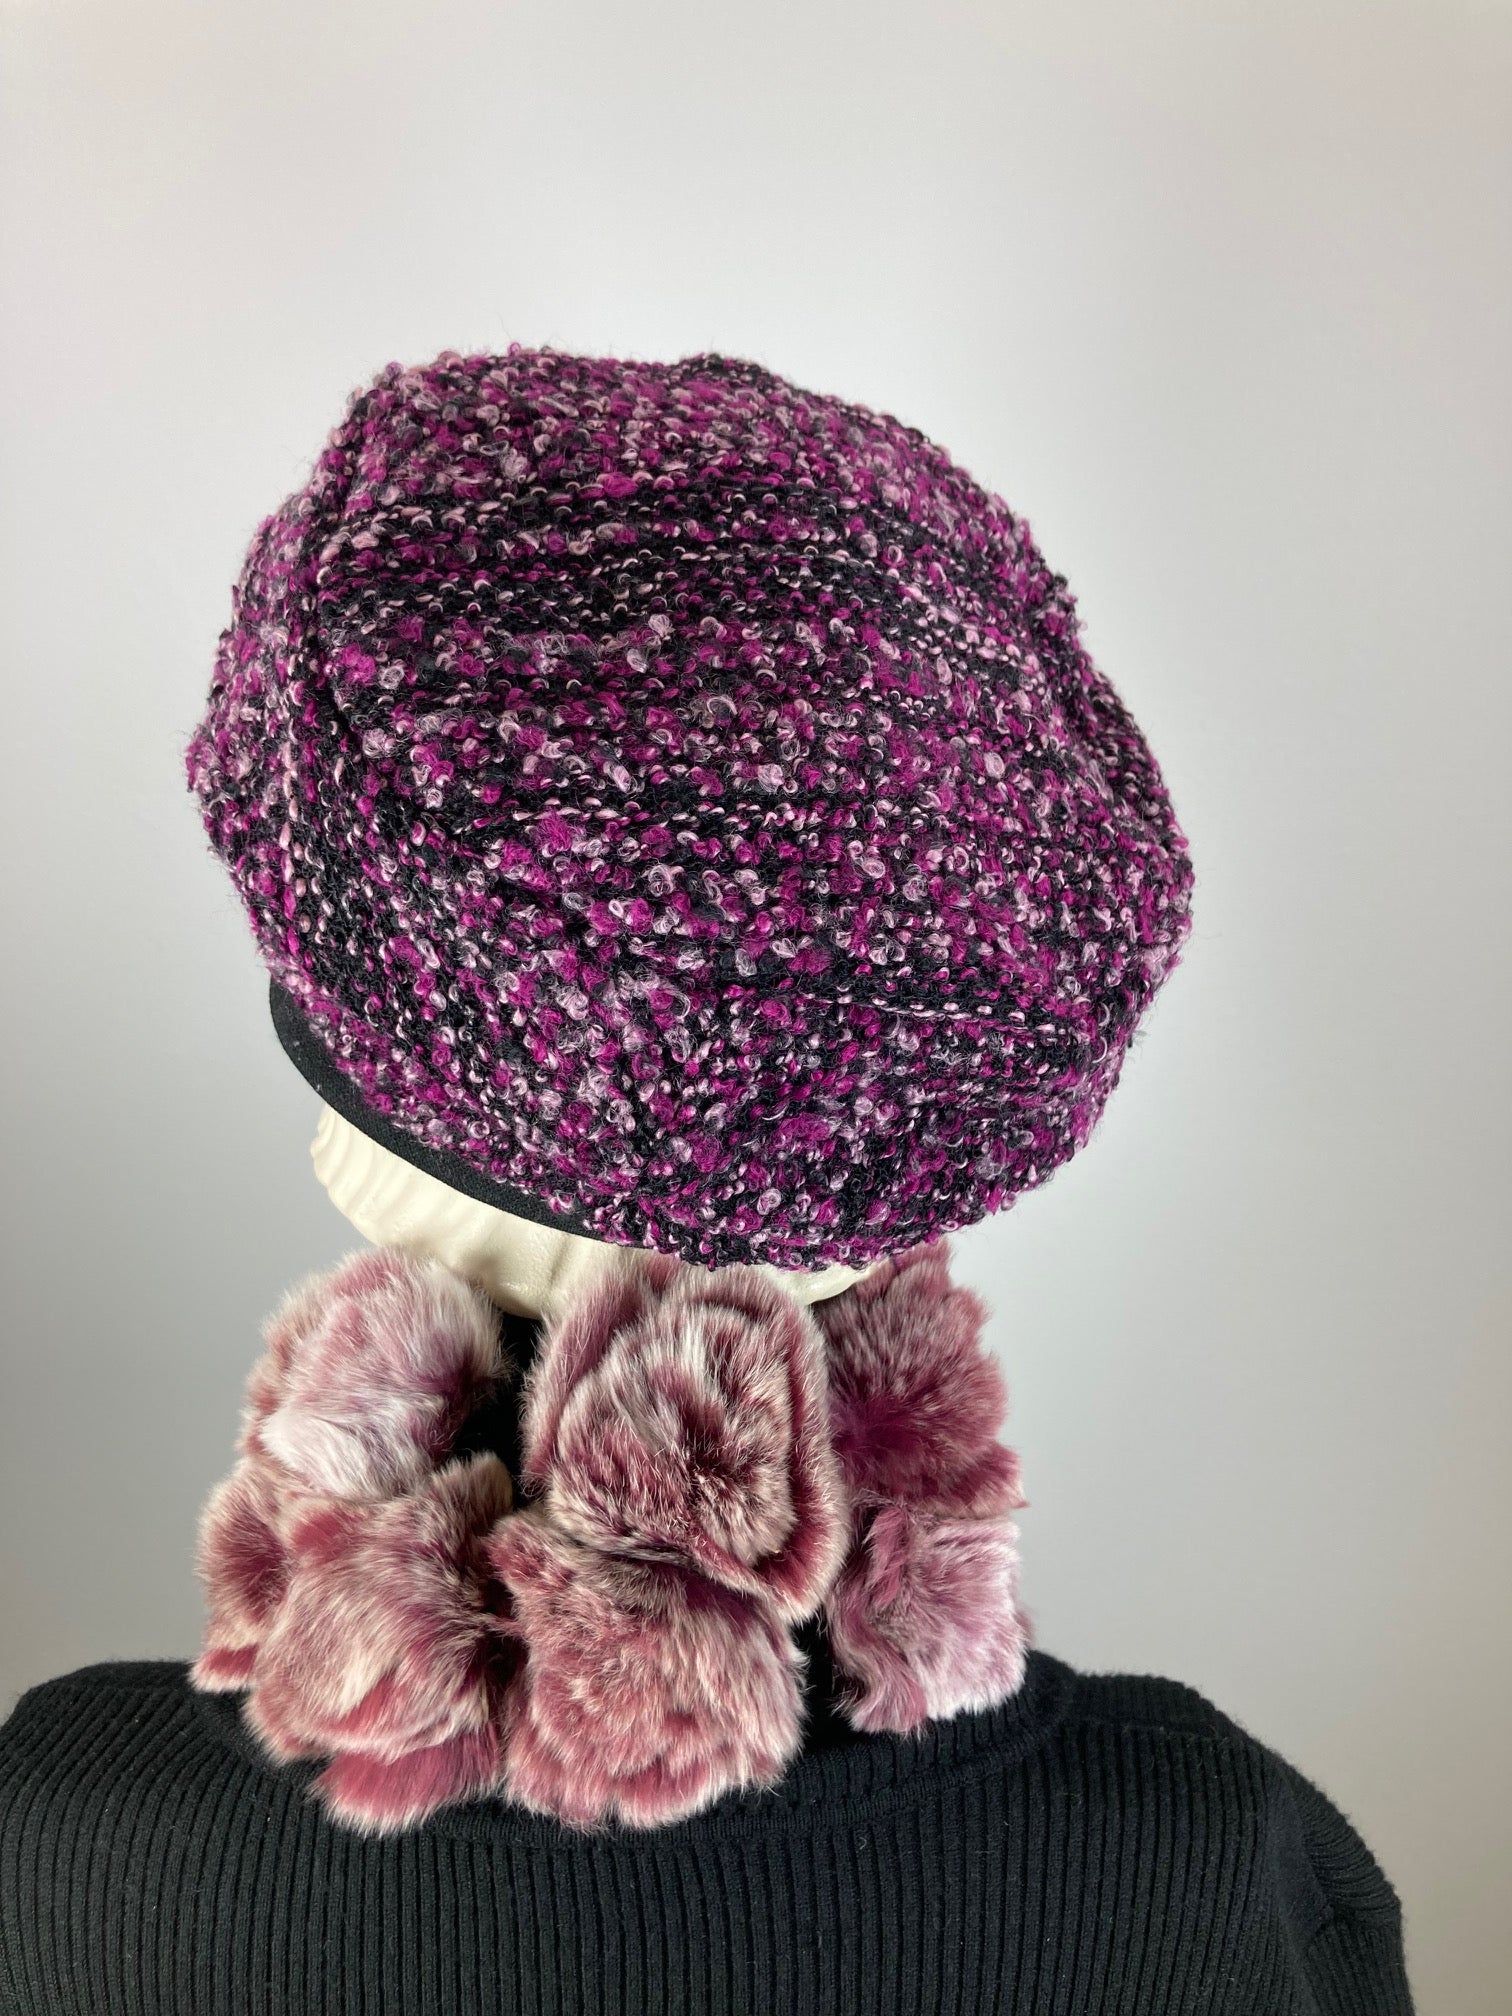 Womens Comfortable Slouchy Beret. Knit black pink burgundy Hat. Boho chic casual slouch hat. Ladies stylish travel hat.